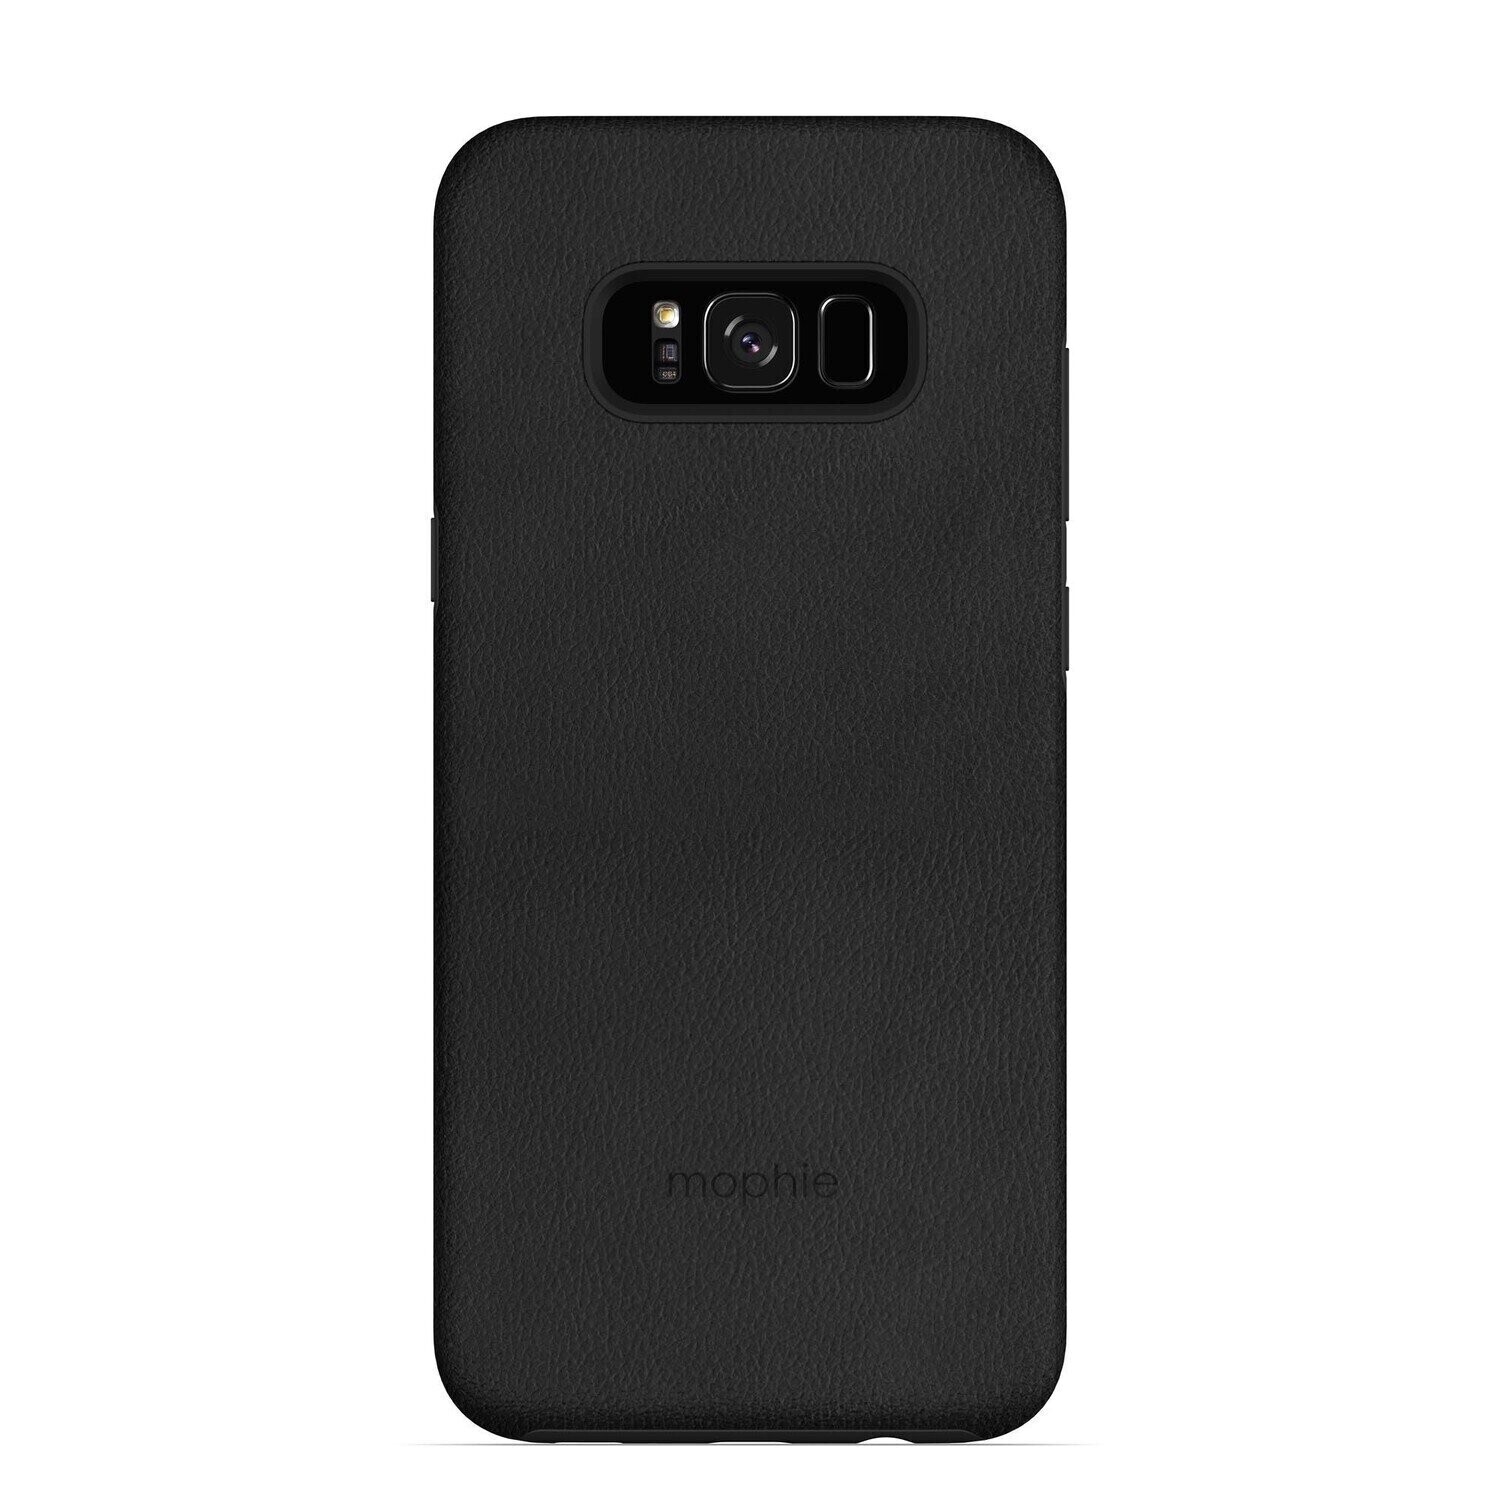 Mophie Samsung Galaxy S8 Charge Force Battery Case (3,000mAh) with Charging Pad, Black